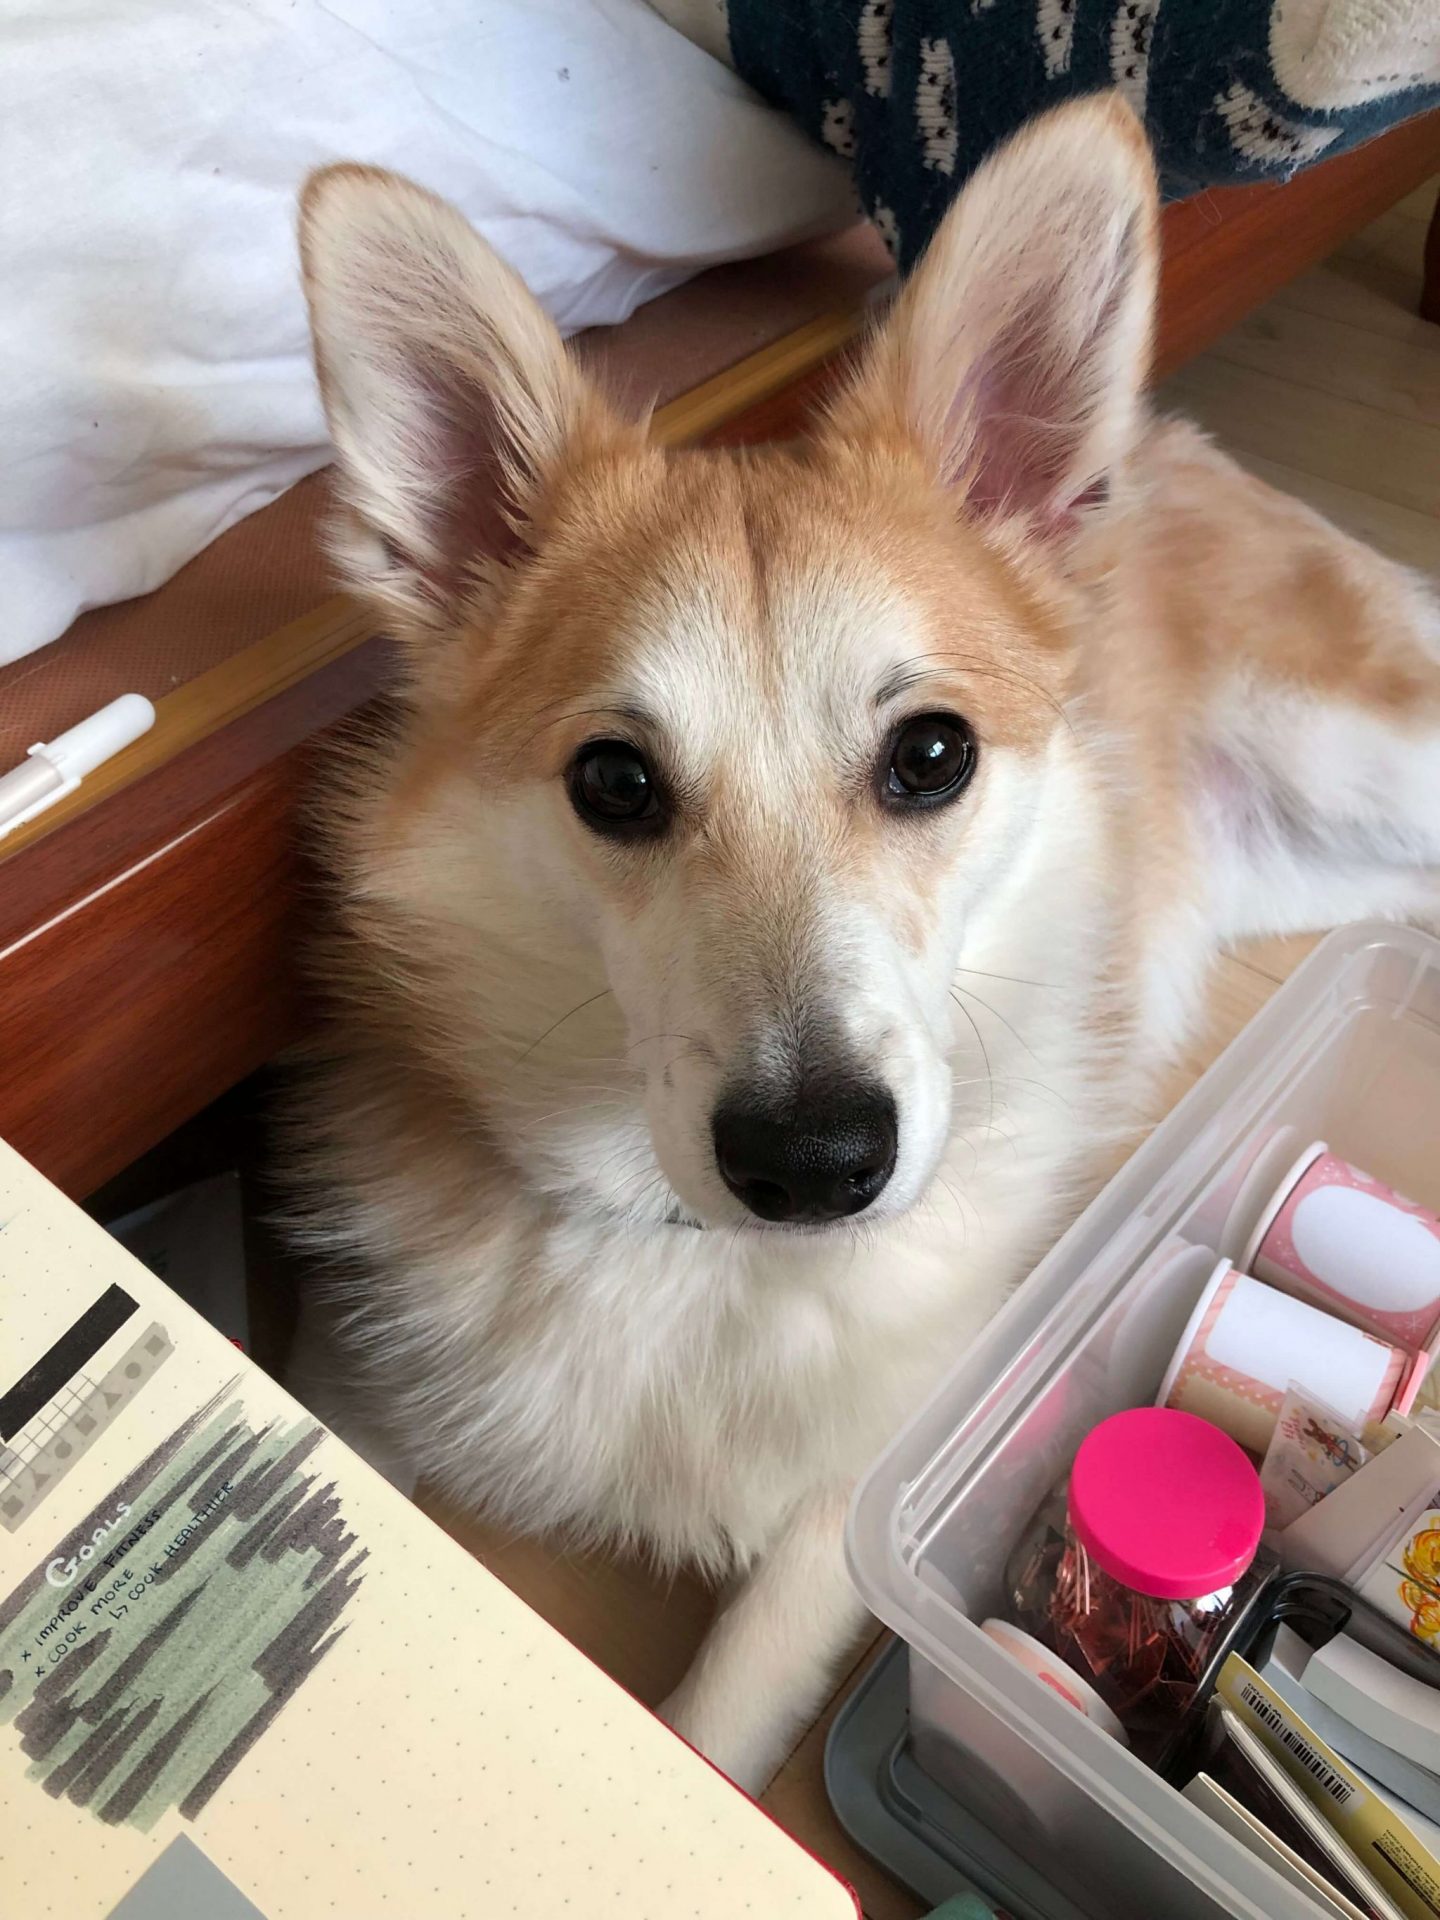 An image of Toast, Fii's corgi puppy, lying down with two boxes of stationery in front of him. He is looking directly at the camera.